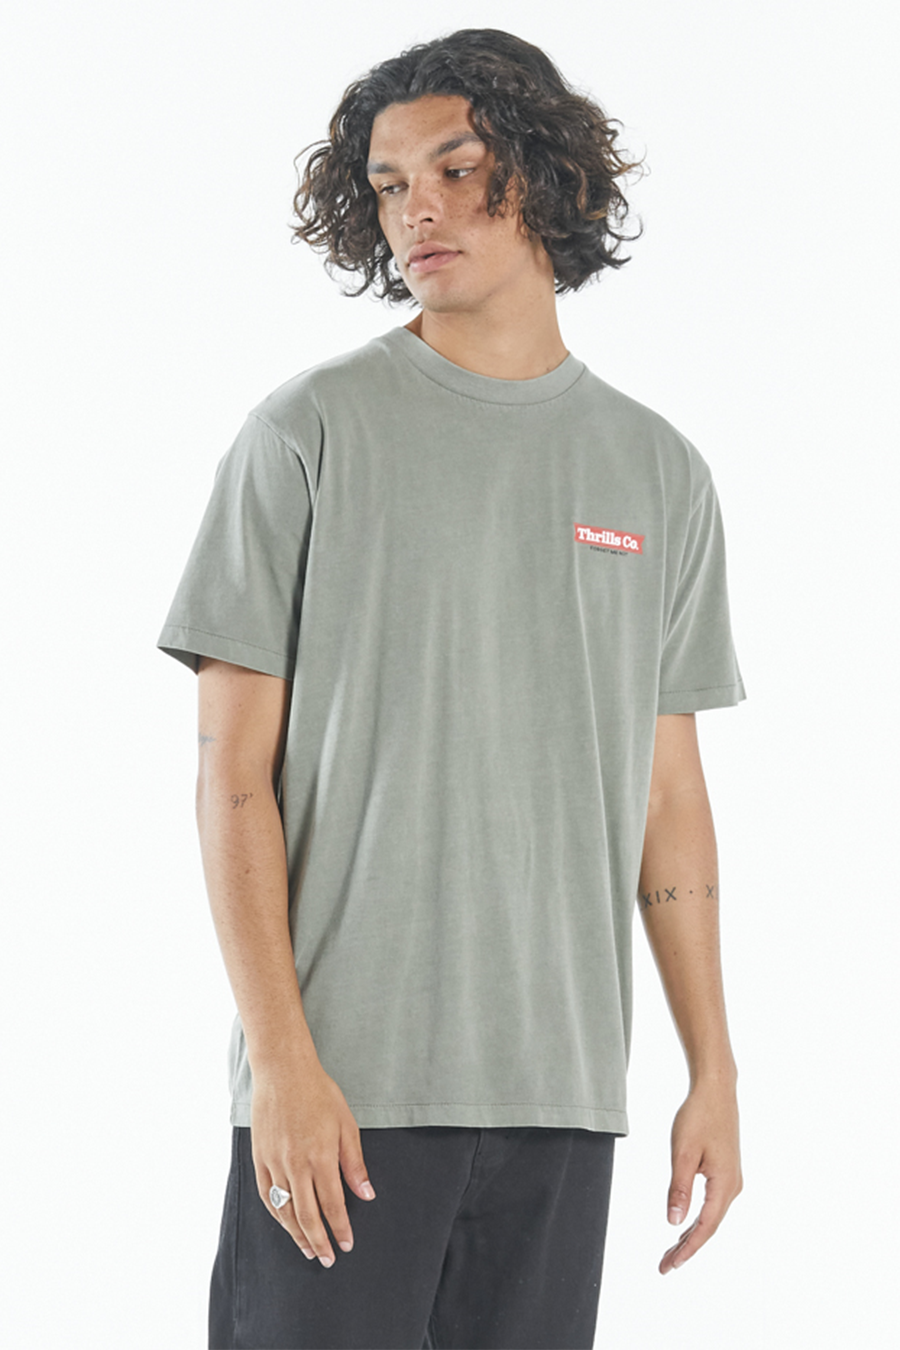 Brigade Merch Tee | Army Green - Main Image Number 1 of 1